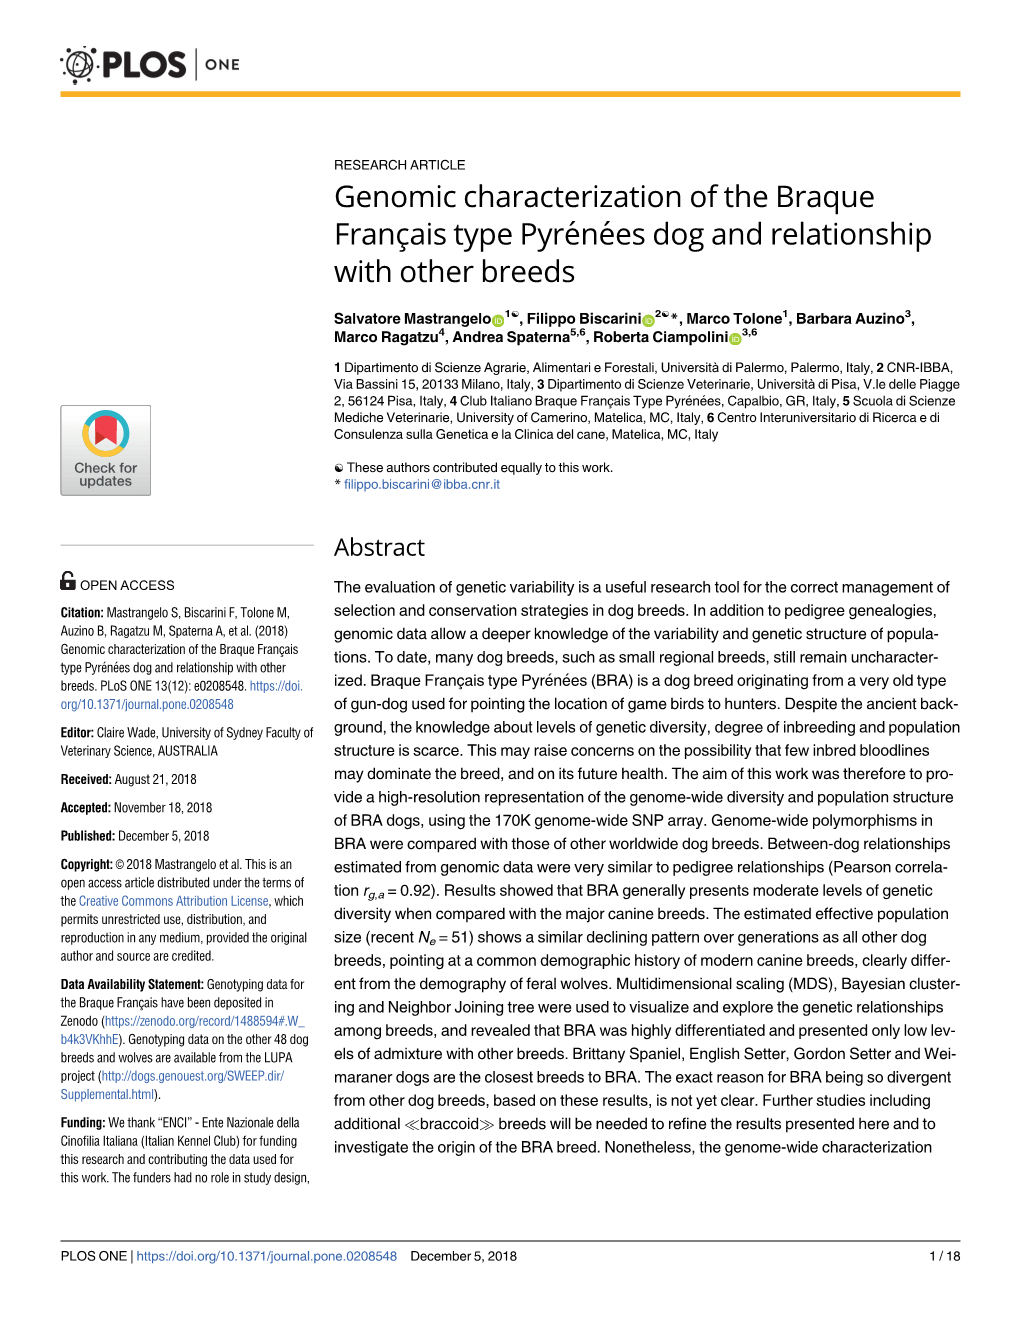 Genomic Characterization of the Braque Franc¸Ais Type Pyre´Ne´Es Dog and Relationship with Other Breeds